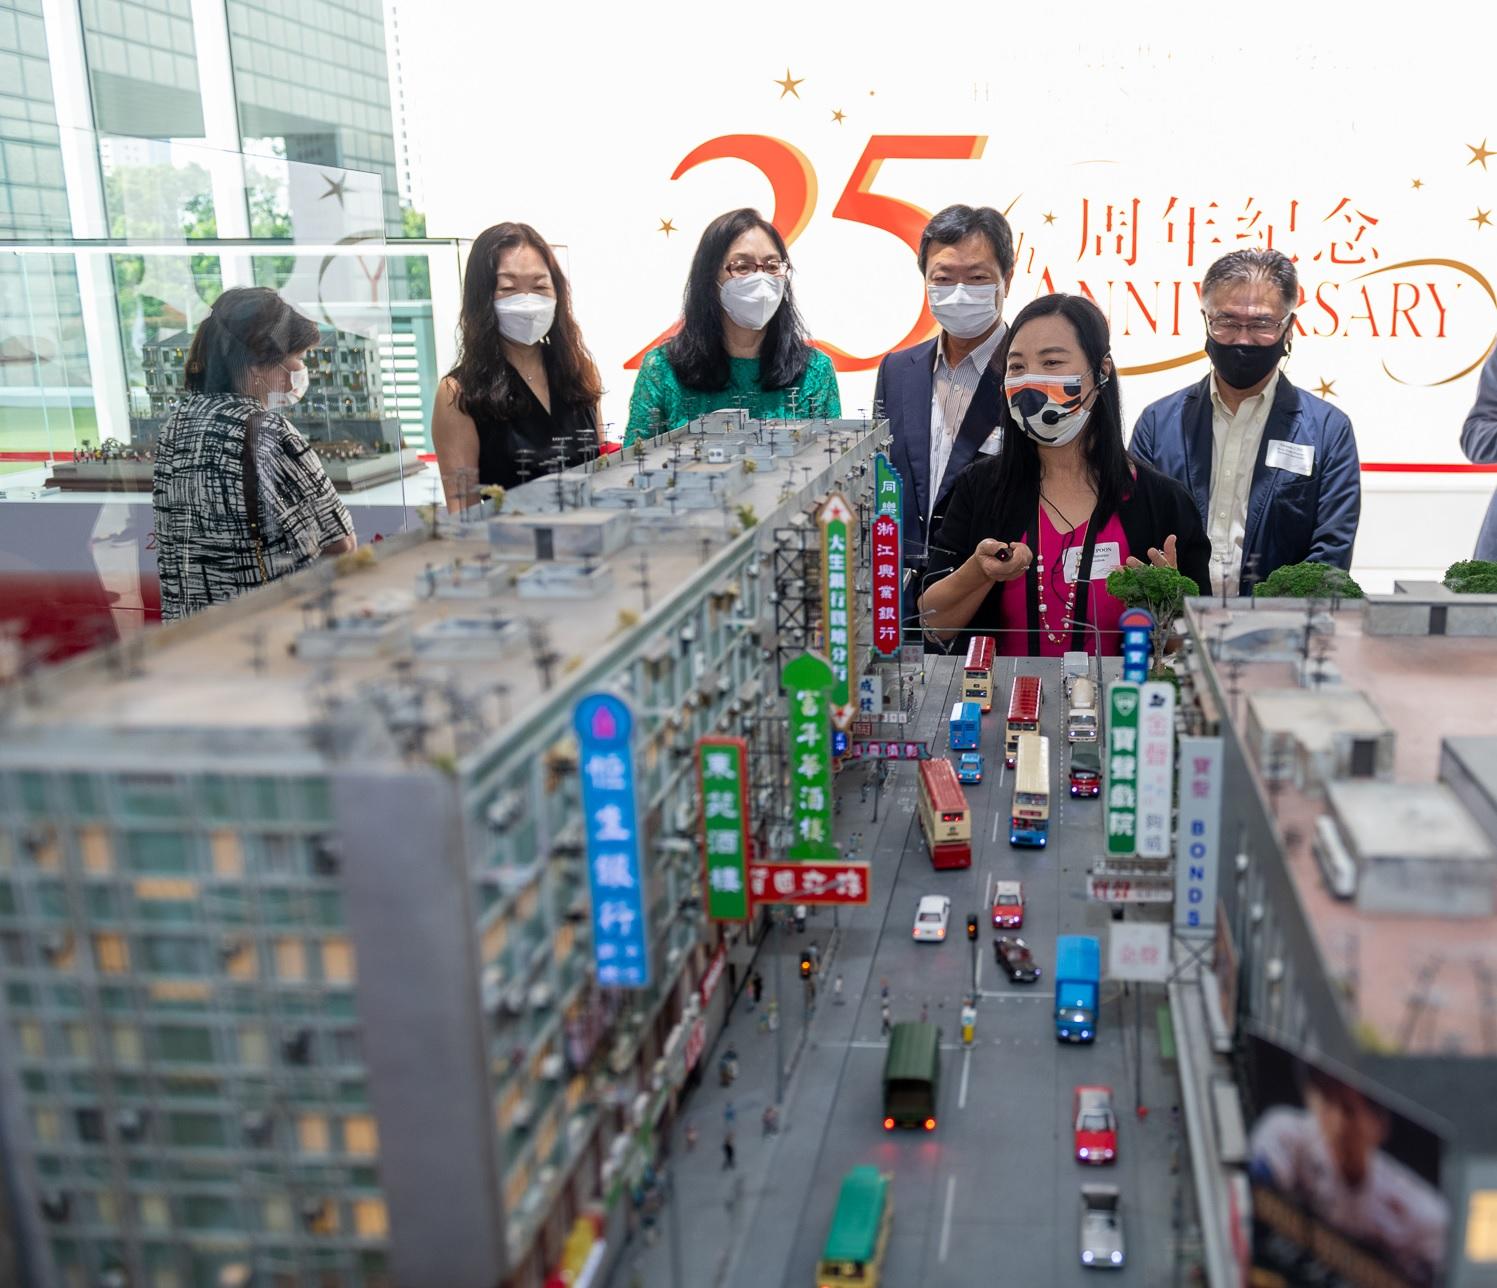 The "Hong Kong: Through the Looking Glass" miniature exhibition organised by the Hong Kong Economic and Trade Office in Singapore opened in Singapore today (April 4). Photo shows guests viewing the exhibits during a guided tour after the opening ceremony of the miniature exhibition.

